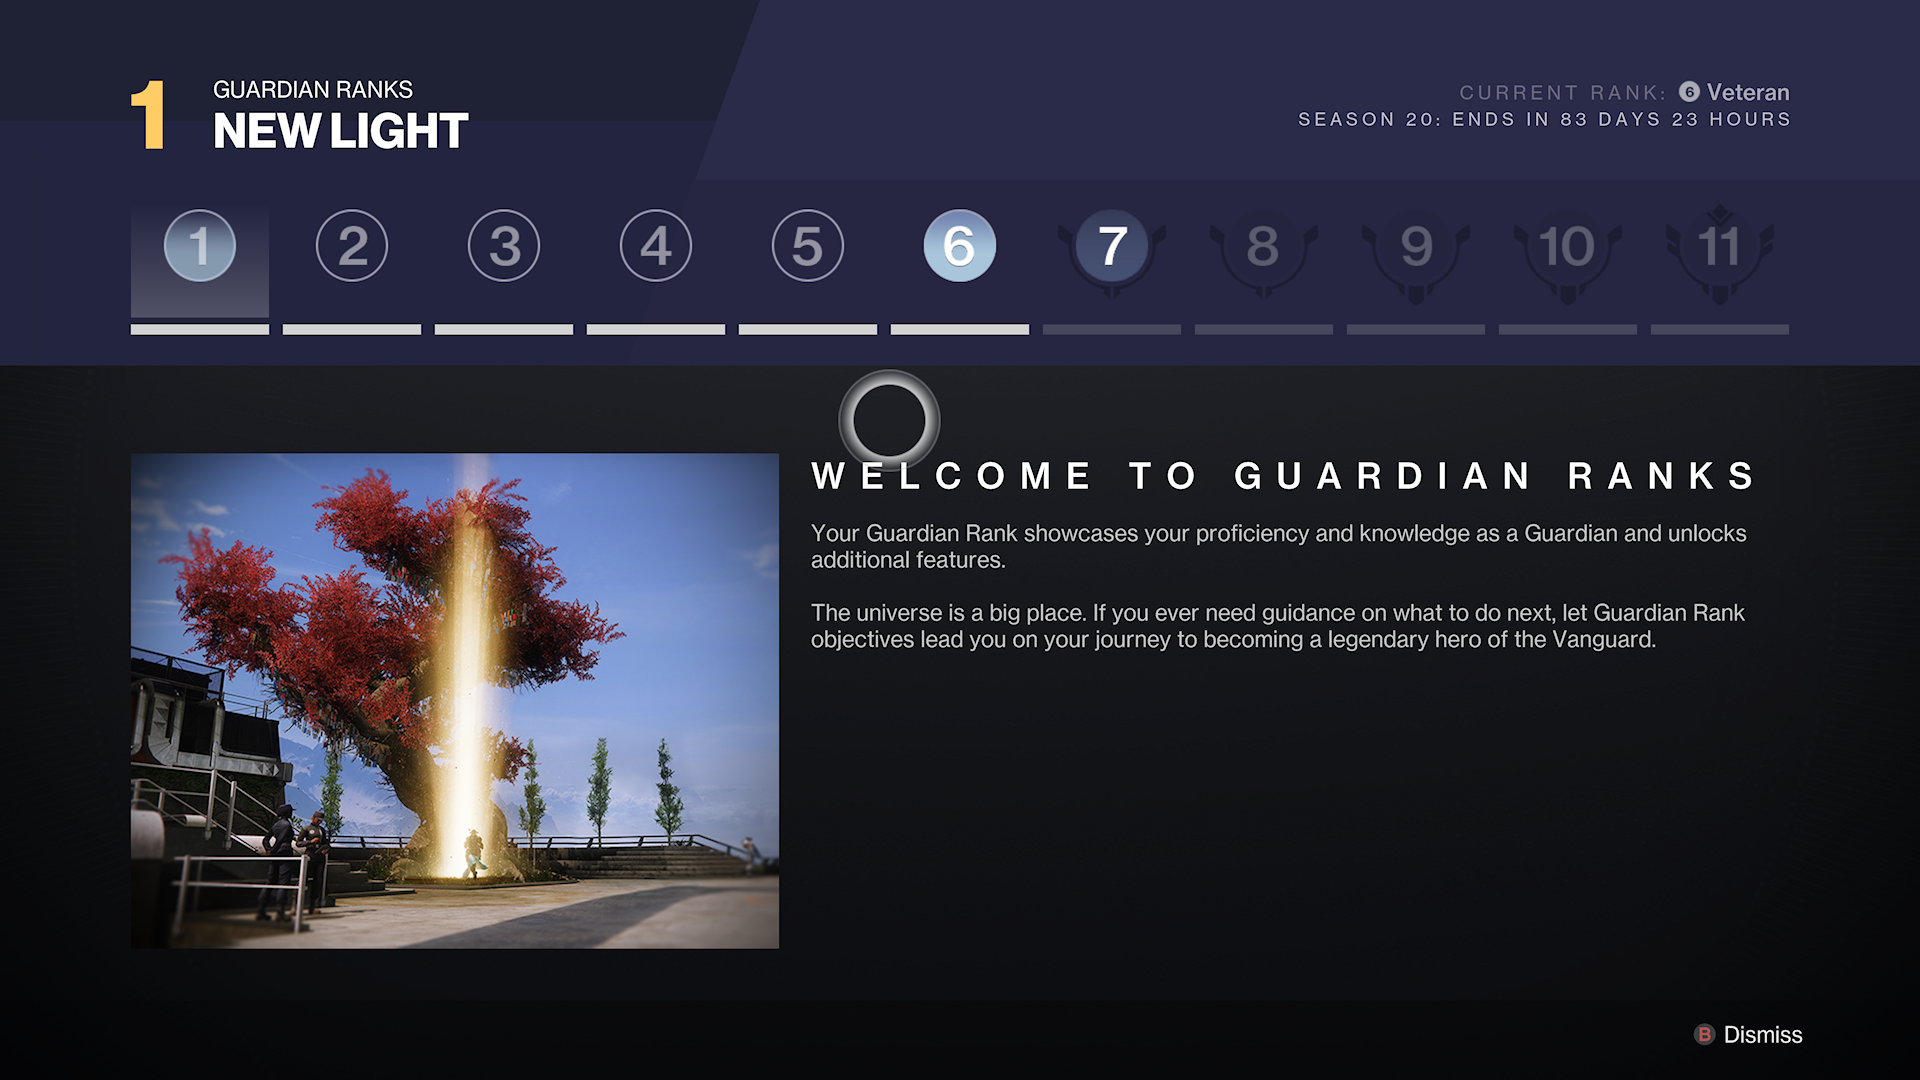 Destiny 2 Lightfall - the Guardian Rank welcome screen with 11 levels